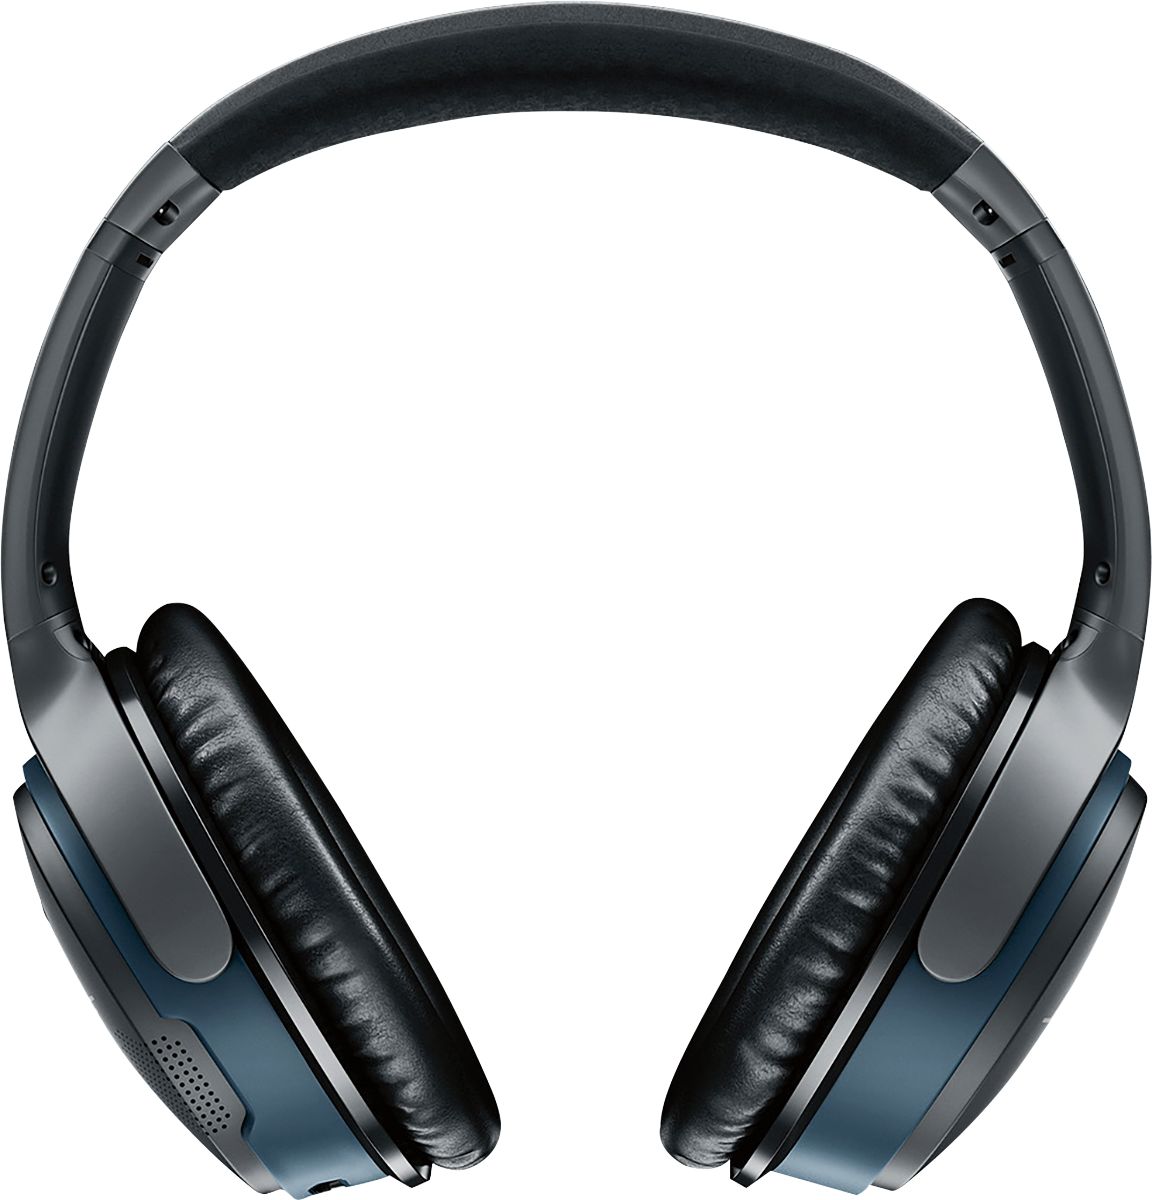 Angle View: Beats by Dr. Dre - Solo Pro More Matte Collection Wireless Noise Cancelling On-Ear Headphones - Light Blue